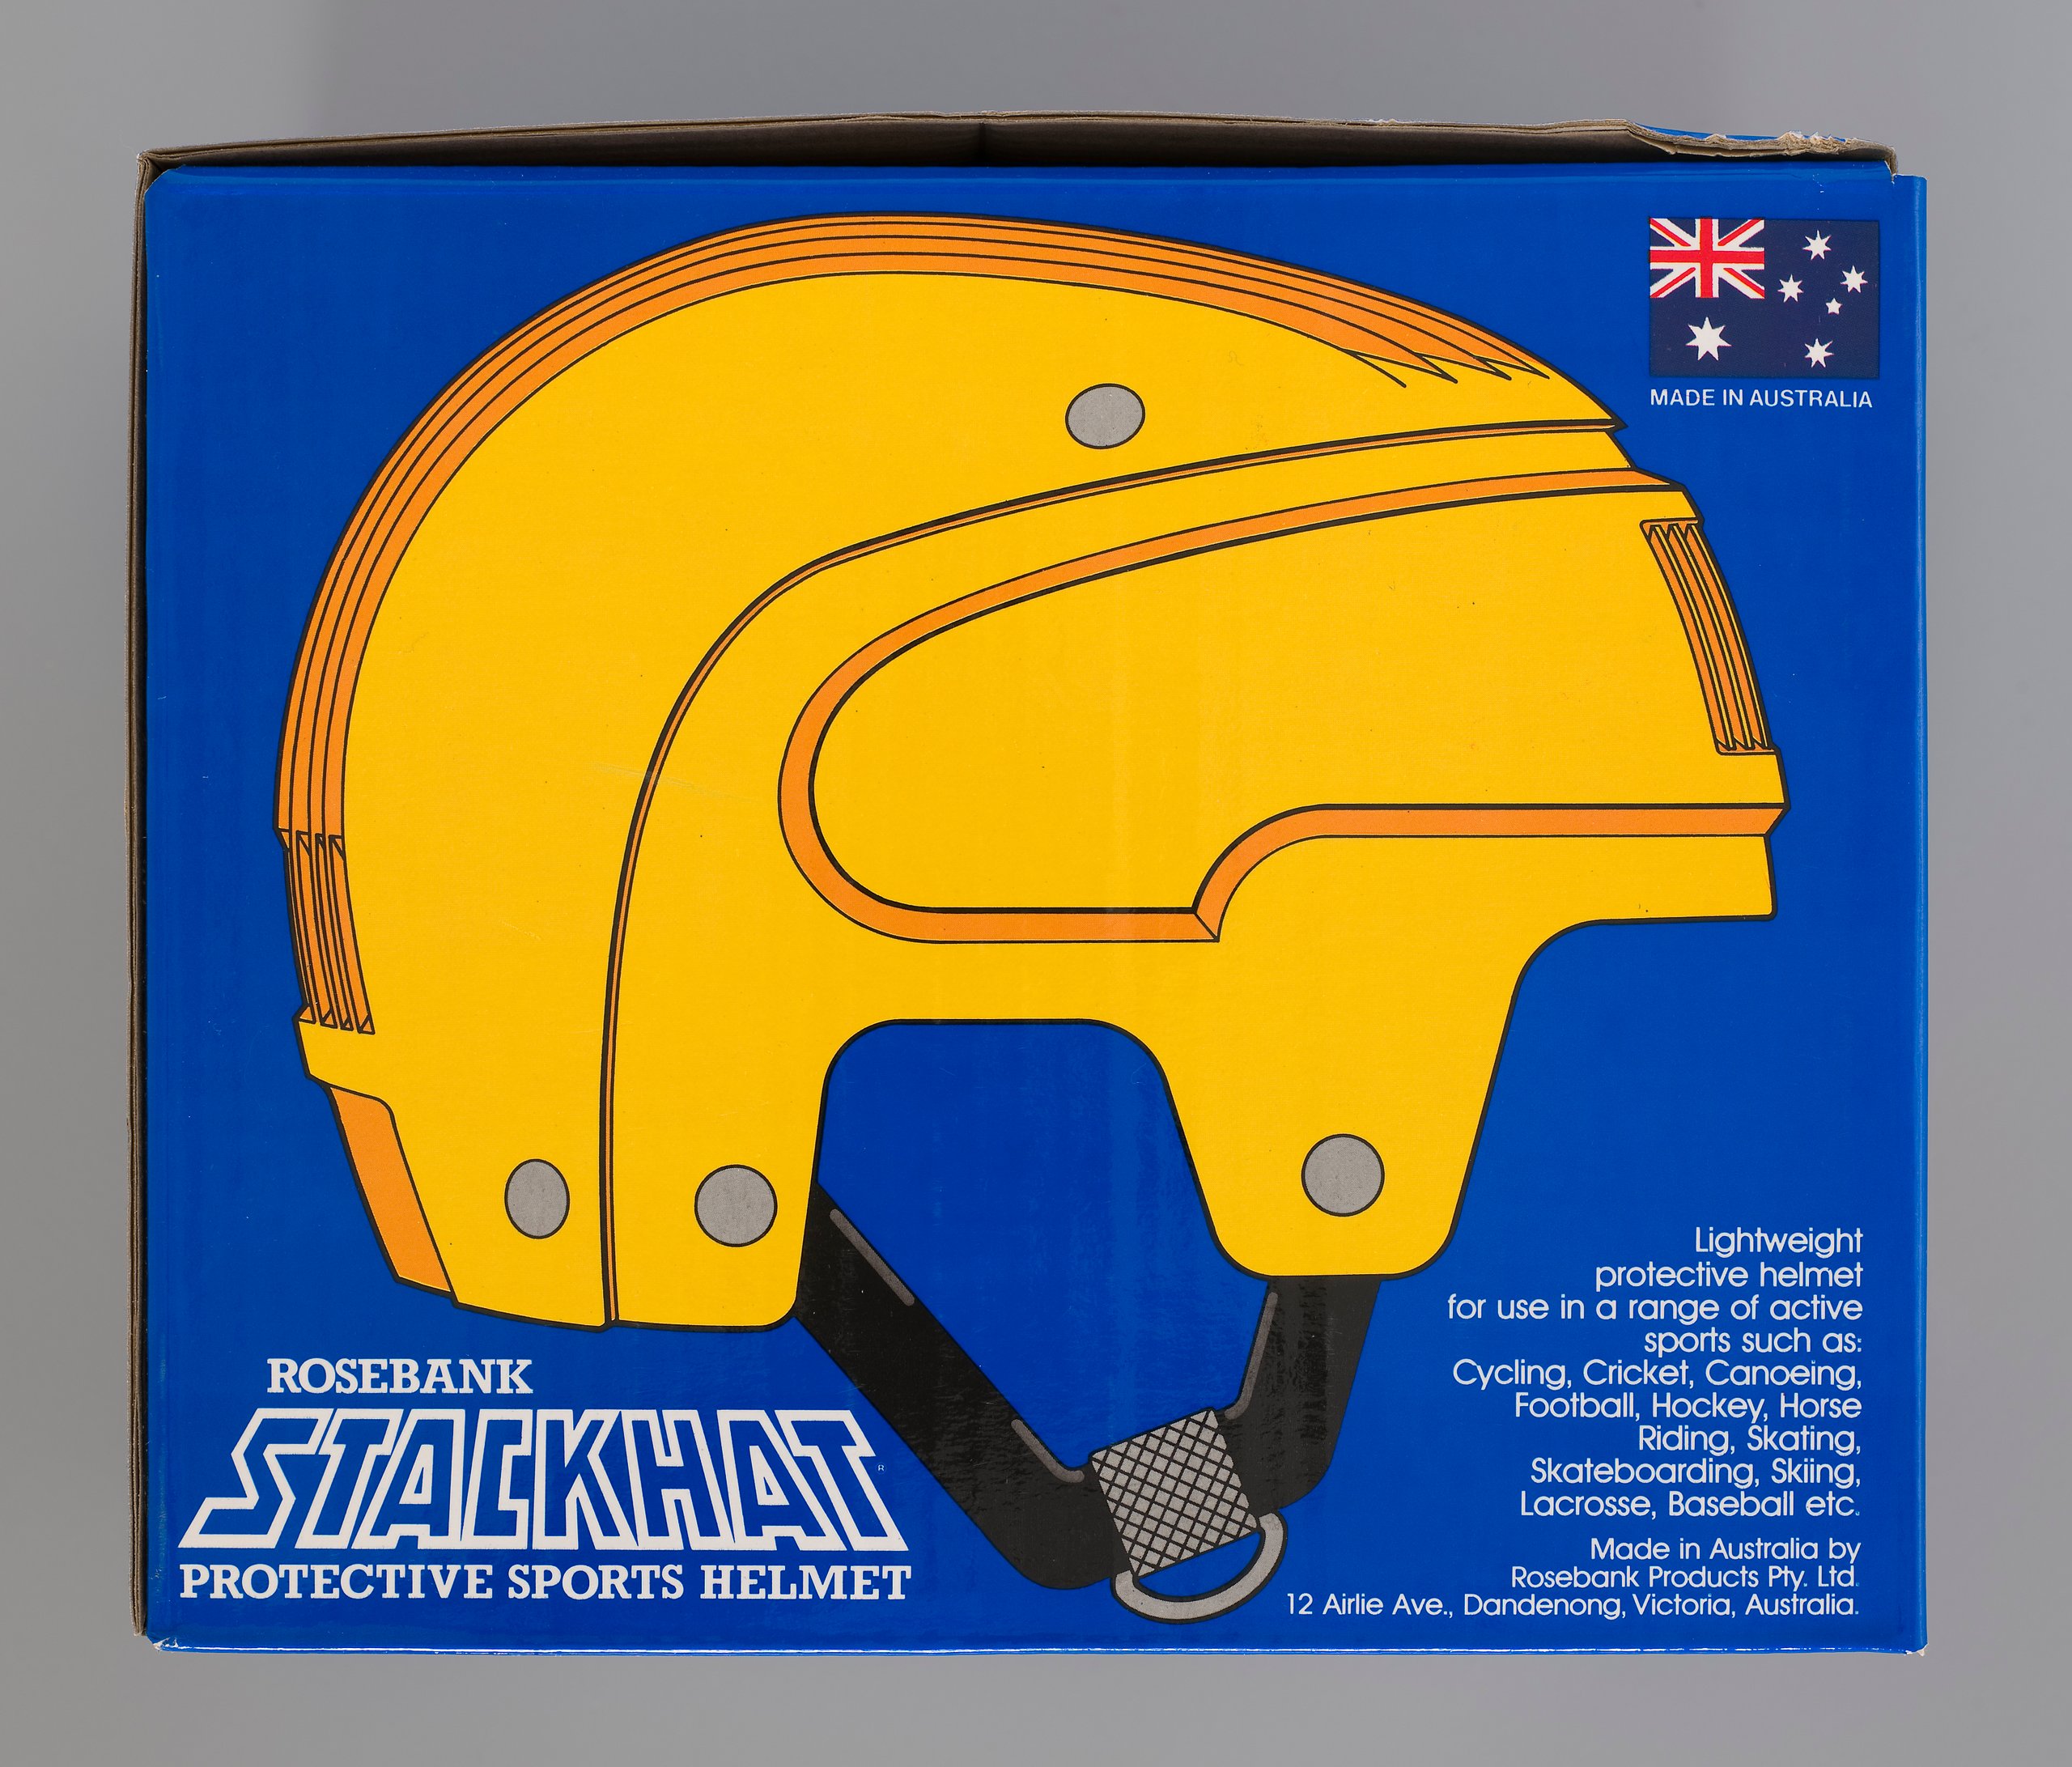 'Stackhat' protective sports helmet and packaging